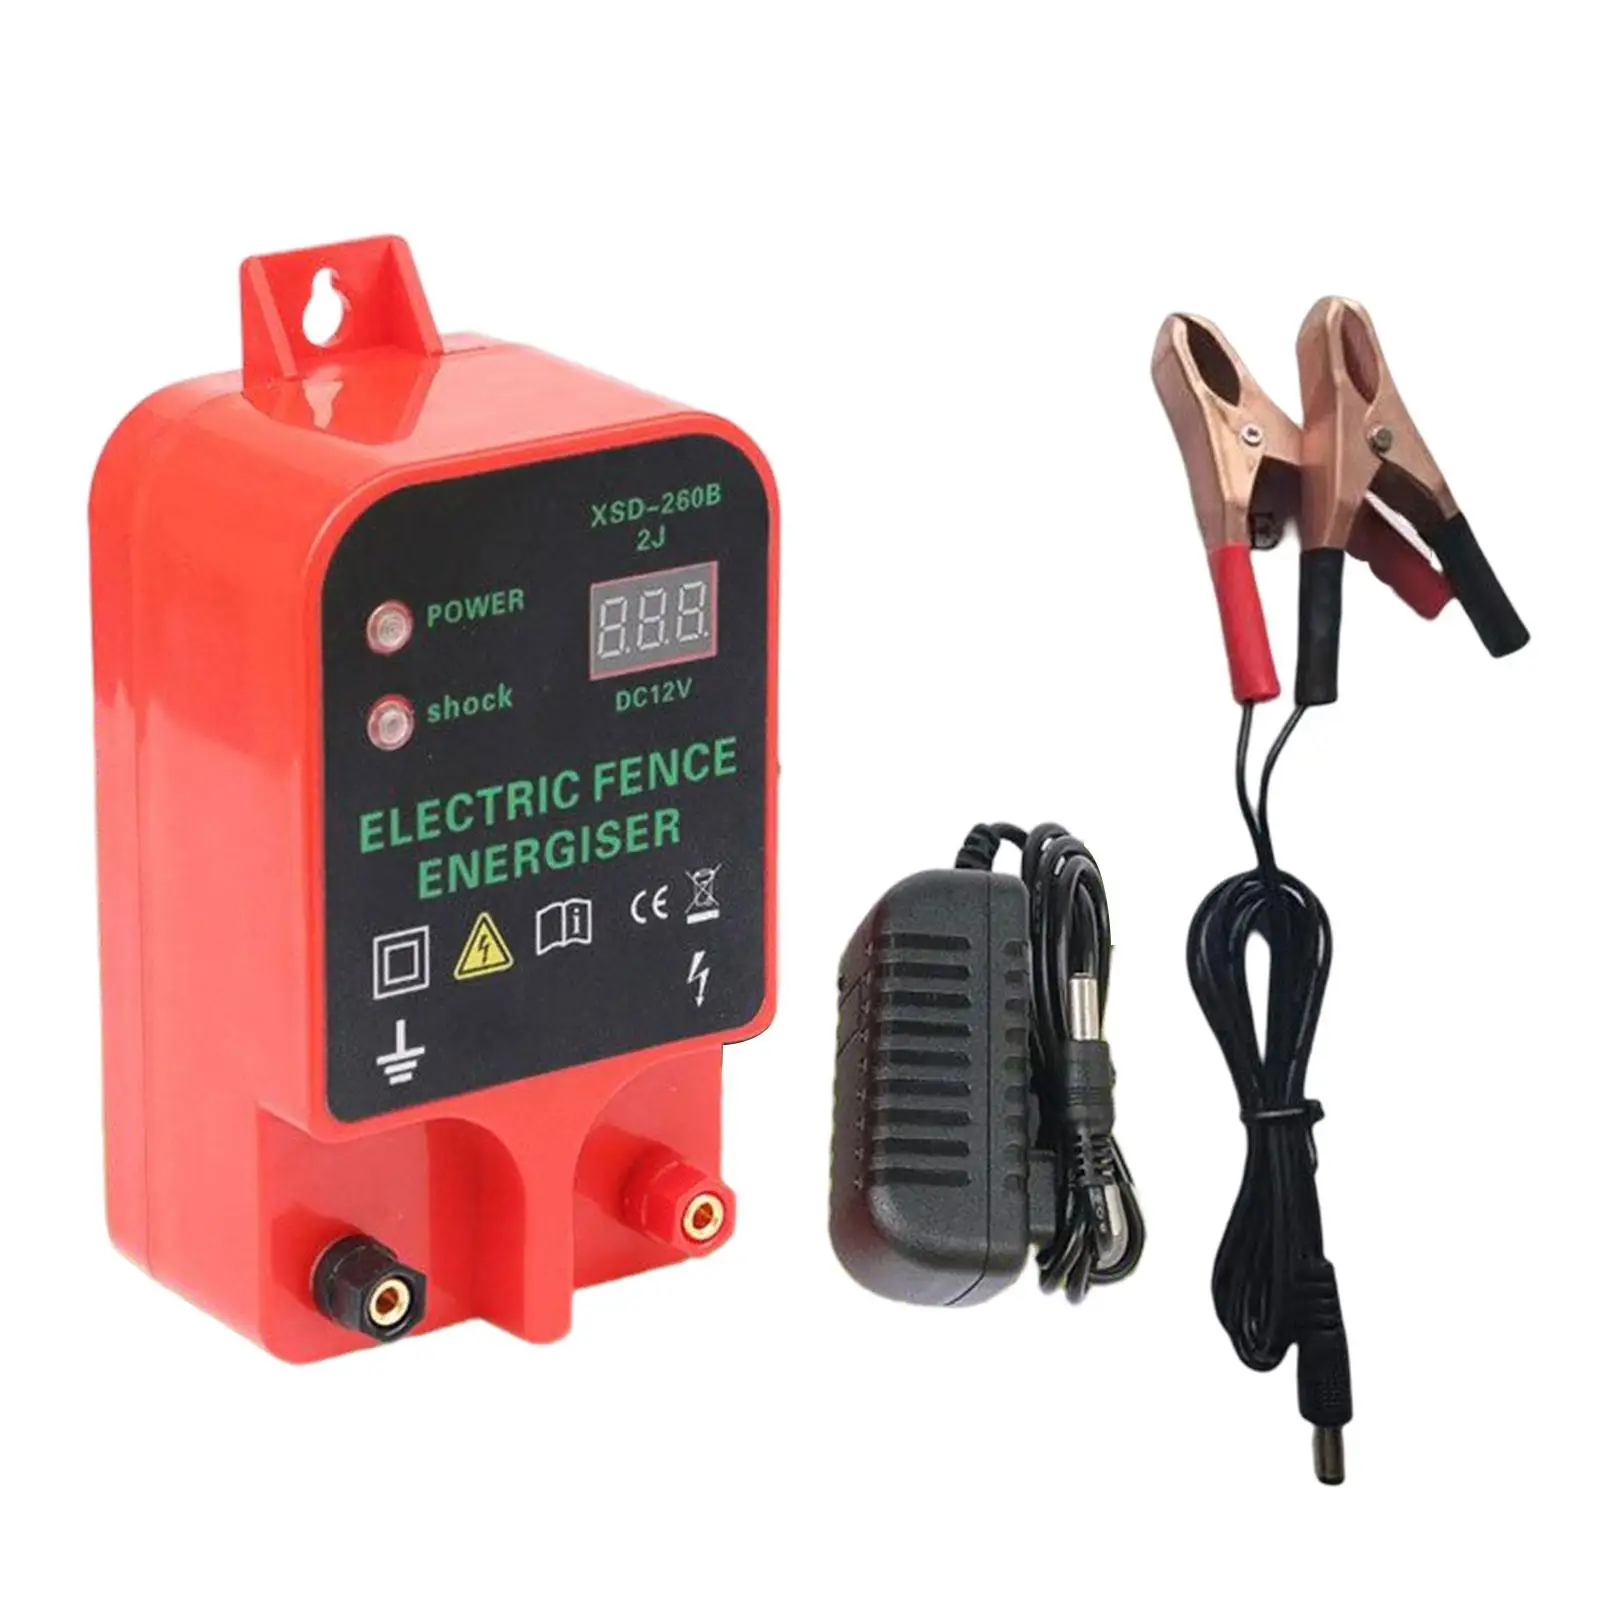 Electric Fence Controller EU Plug Xsd-260B Waterproof for Farm Agricultural Fencing